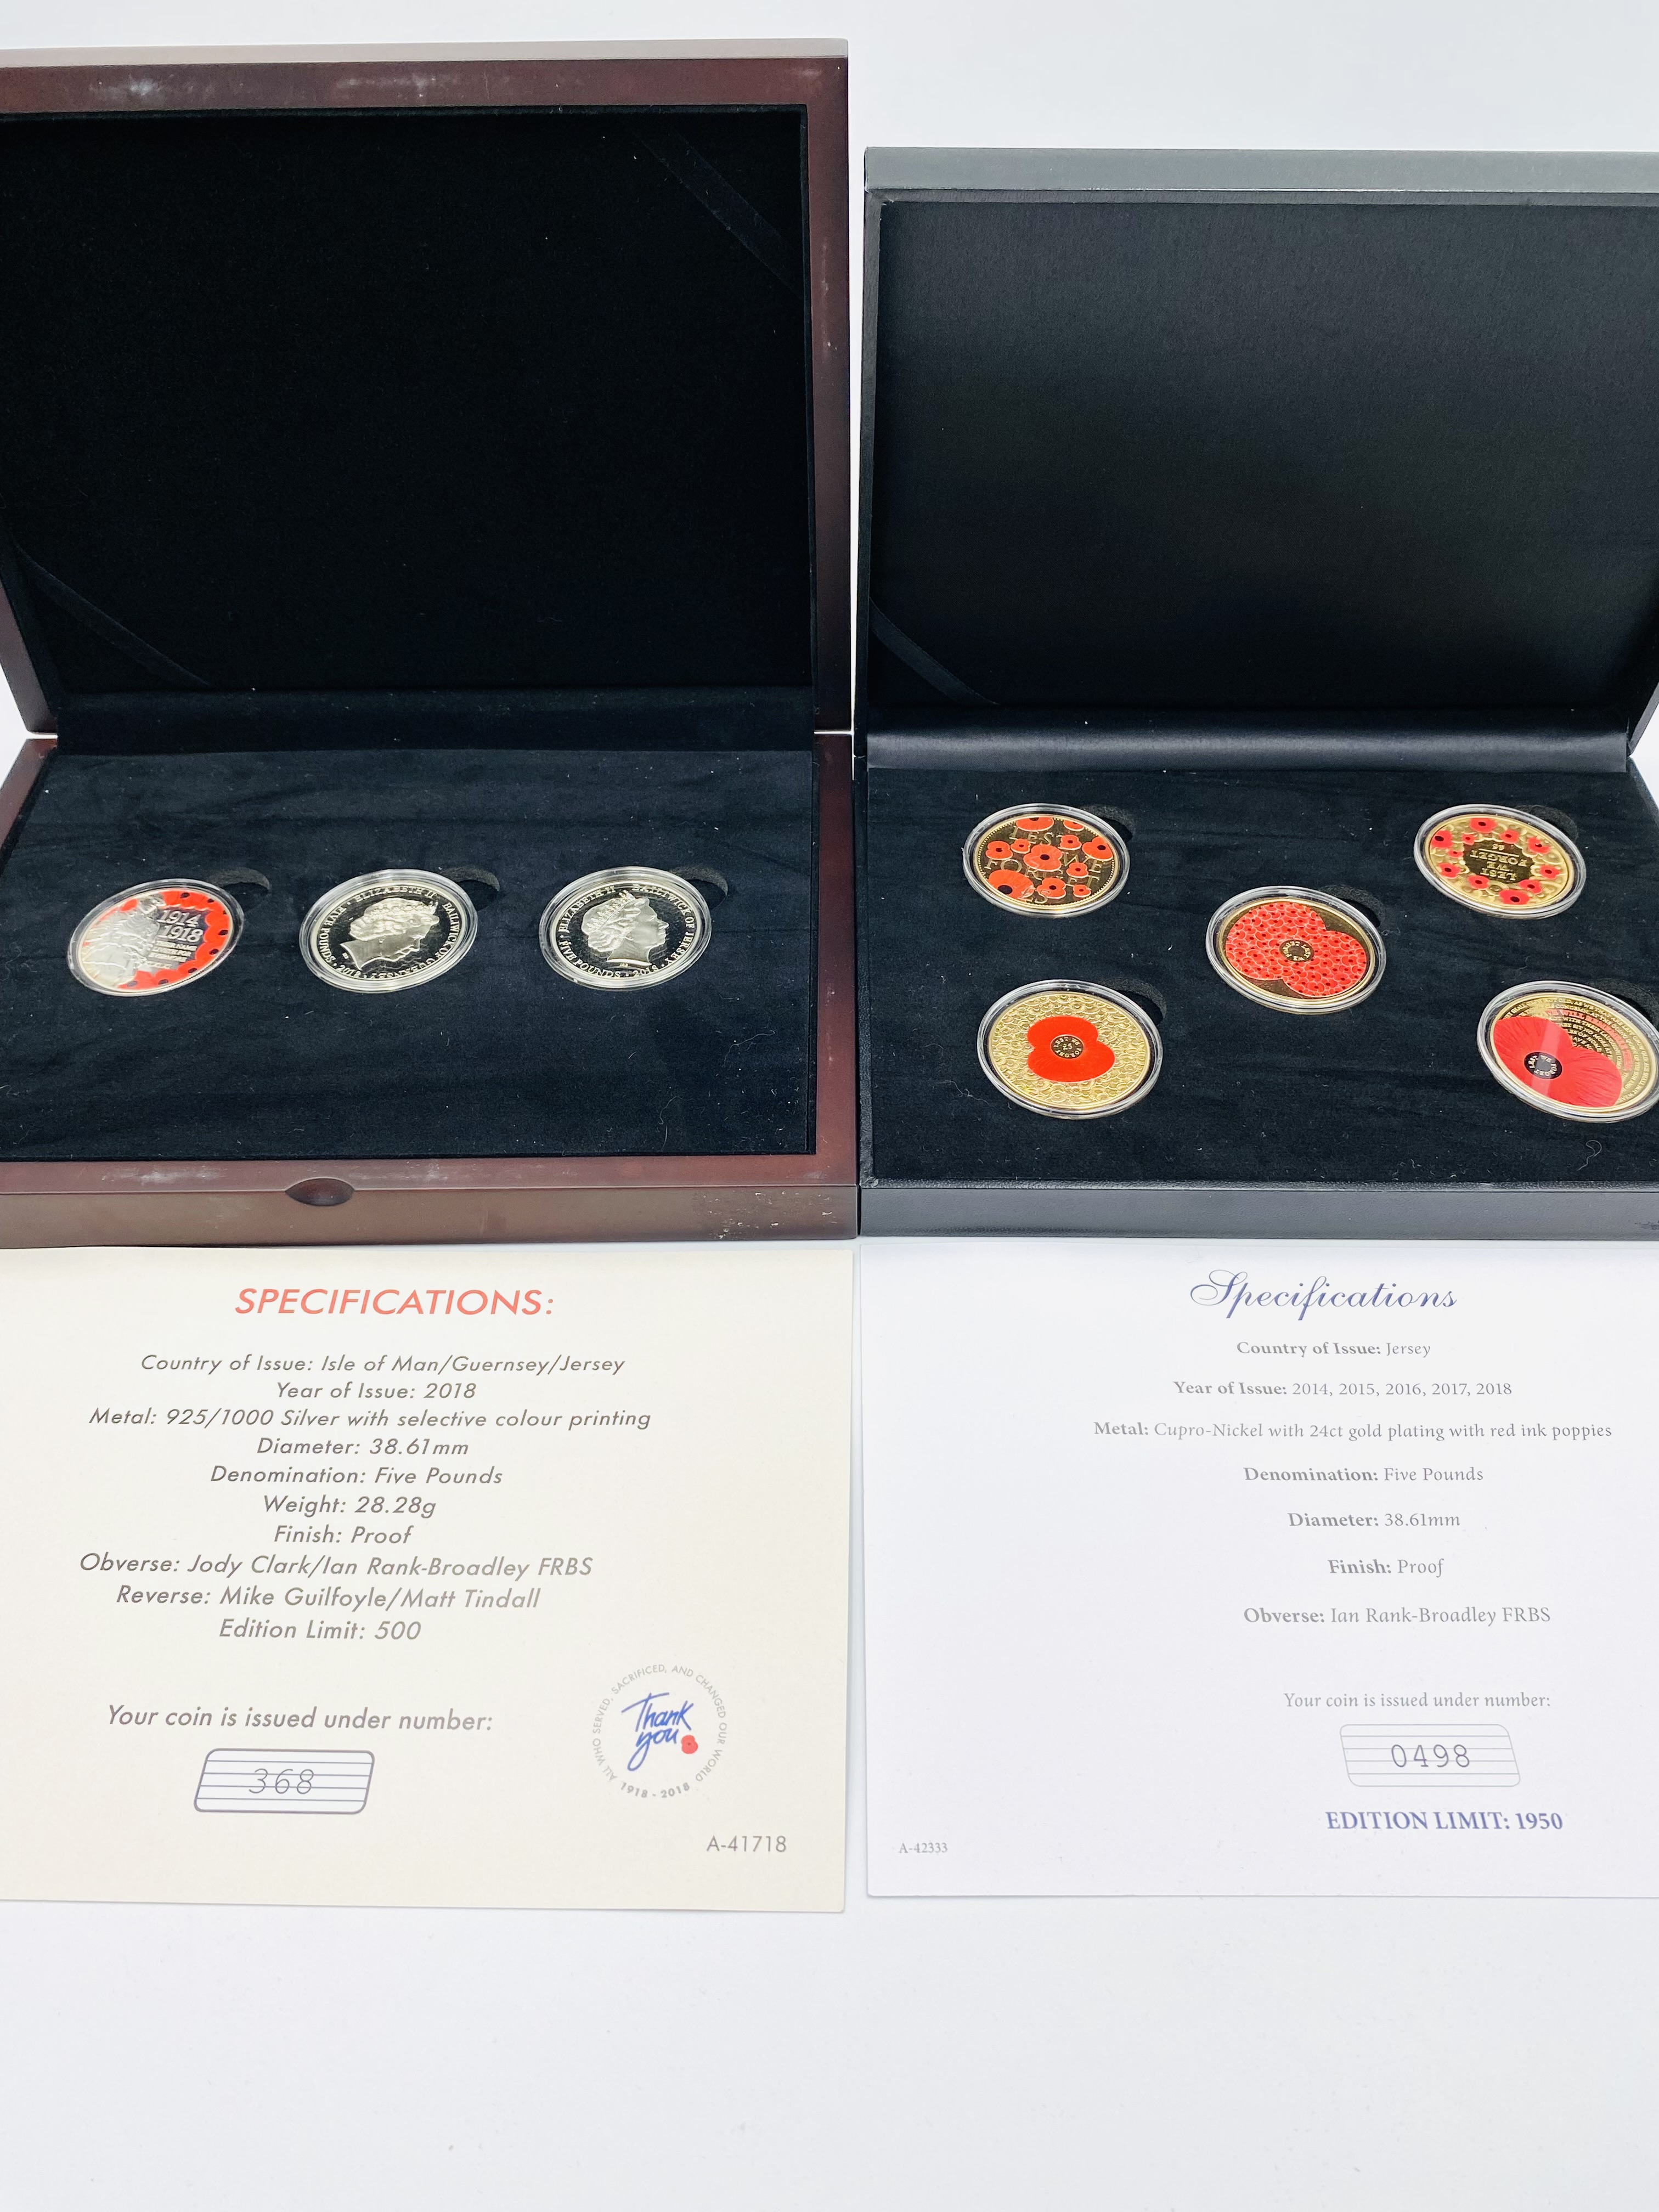 Two British Legion First World War centenary silver coin collections